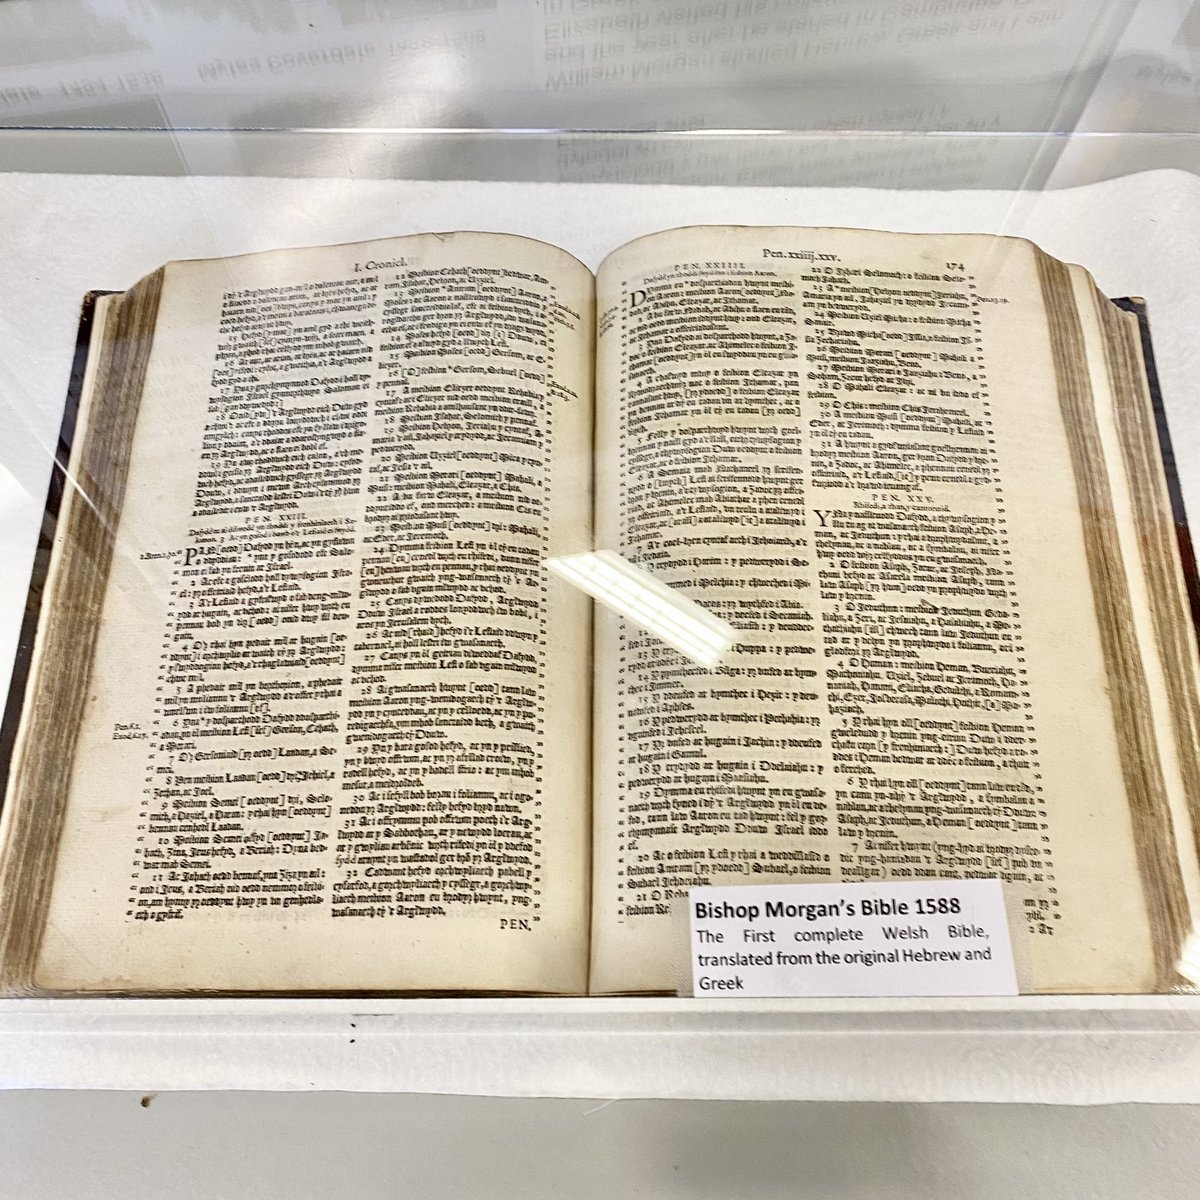 This afternoon Jon and myself attended a private house call in Llandovery. After filling the van with some wonderful treasures we decided to take a quick stroll around the town and go for some lunch. Afterwards we visited the Welsh Bible exhibition at the Rhys Pritchard -